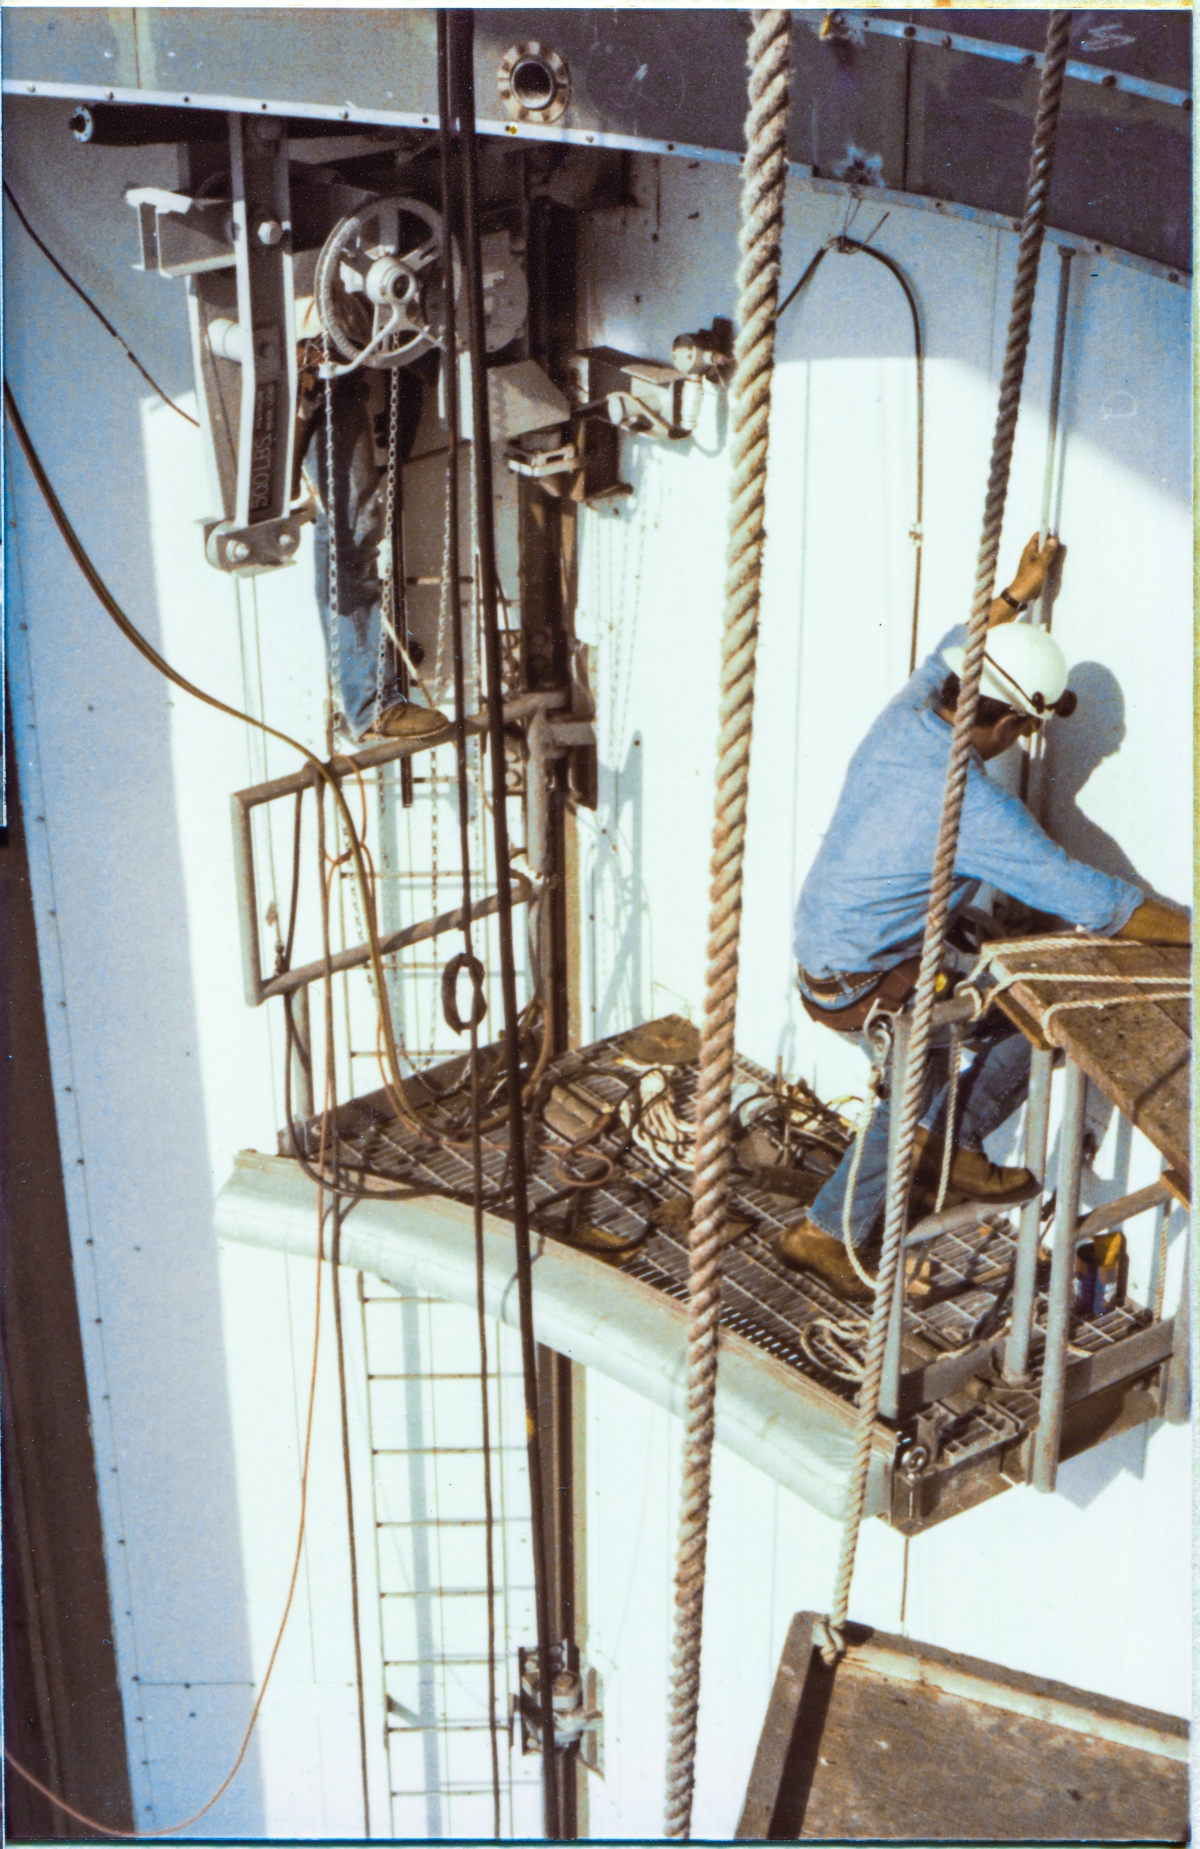 Image 063. Union Ironworkers from Local 808, working for Ivey Steel at Space Shuttle Launch Complex 39-B, Kennedy Space Center, Florida, have lashed scaffoldboards between the upper set of Torque Tube Access Platforms fixed and removable handrails, providing complete (although scary as hell, too) access across both of the Payload Changeout Room Main Doors, and are using the Platforms to give them access to the Hoists associated with them, which are being installed as you're seeing it. This work is proceeding just beneath the ”ledge” of the Antenna Access Platform at elevation 198'-7½”, nearly 60 feet above the far edge of the RSS Main Floor steel in the Orbiter Mold Line area, which itself is another 80 feet above the concrete of the pad deck. Photo by James MacLaren.